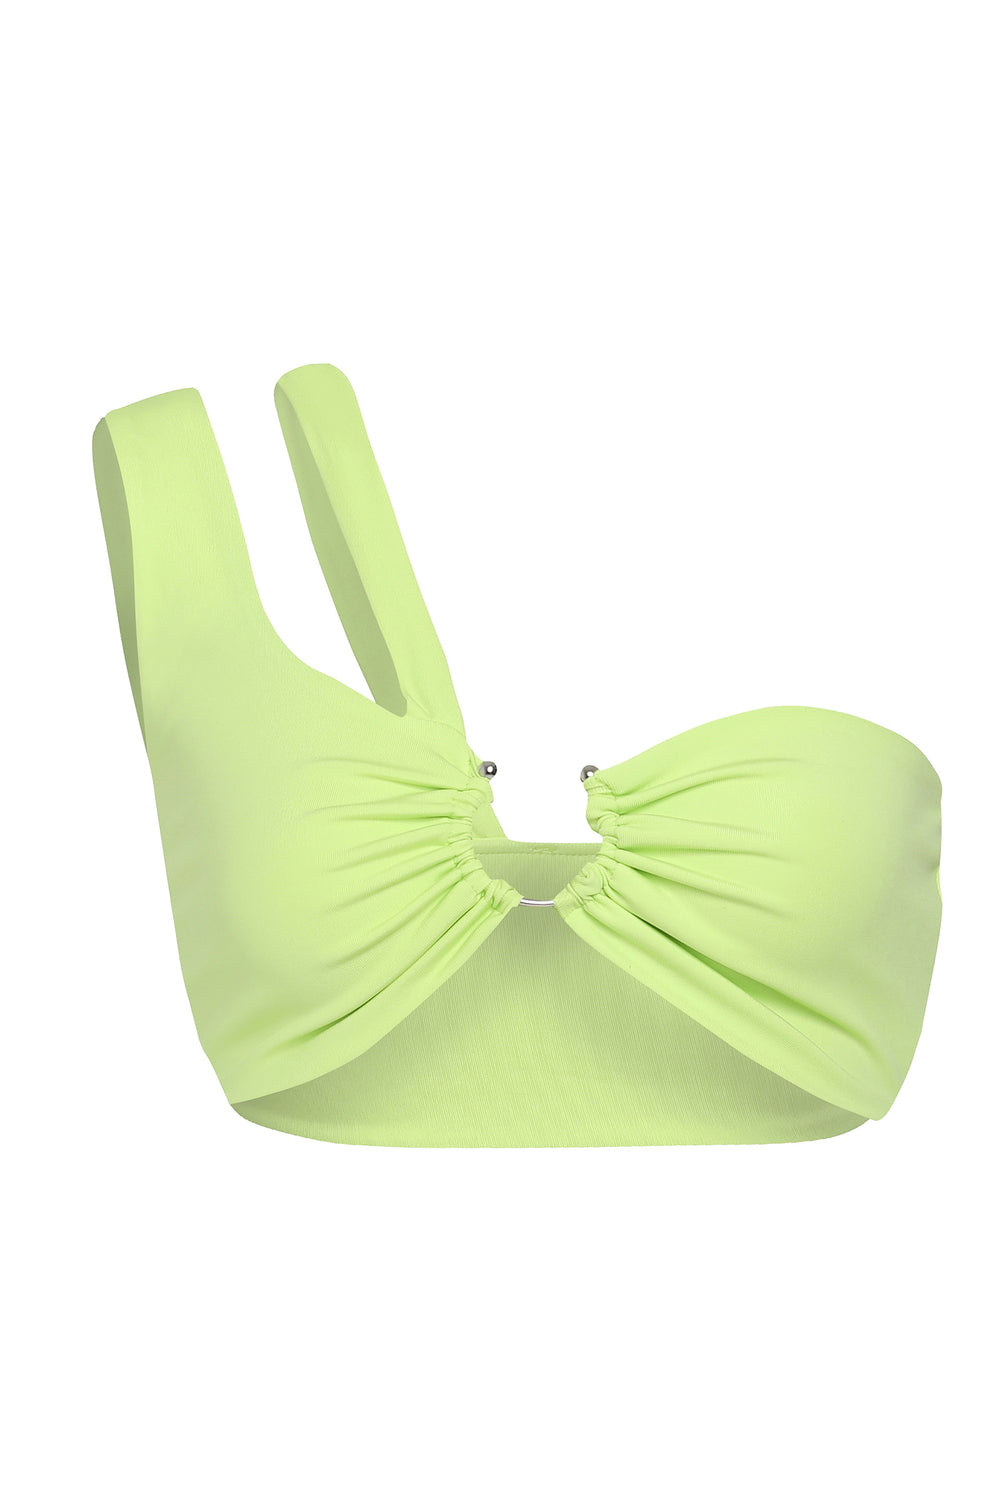 Ring Detailed Bustier Green